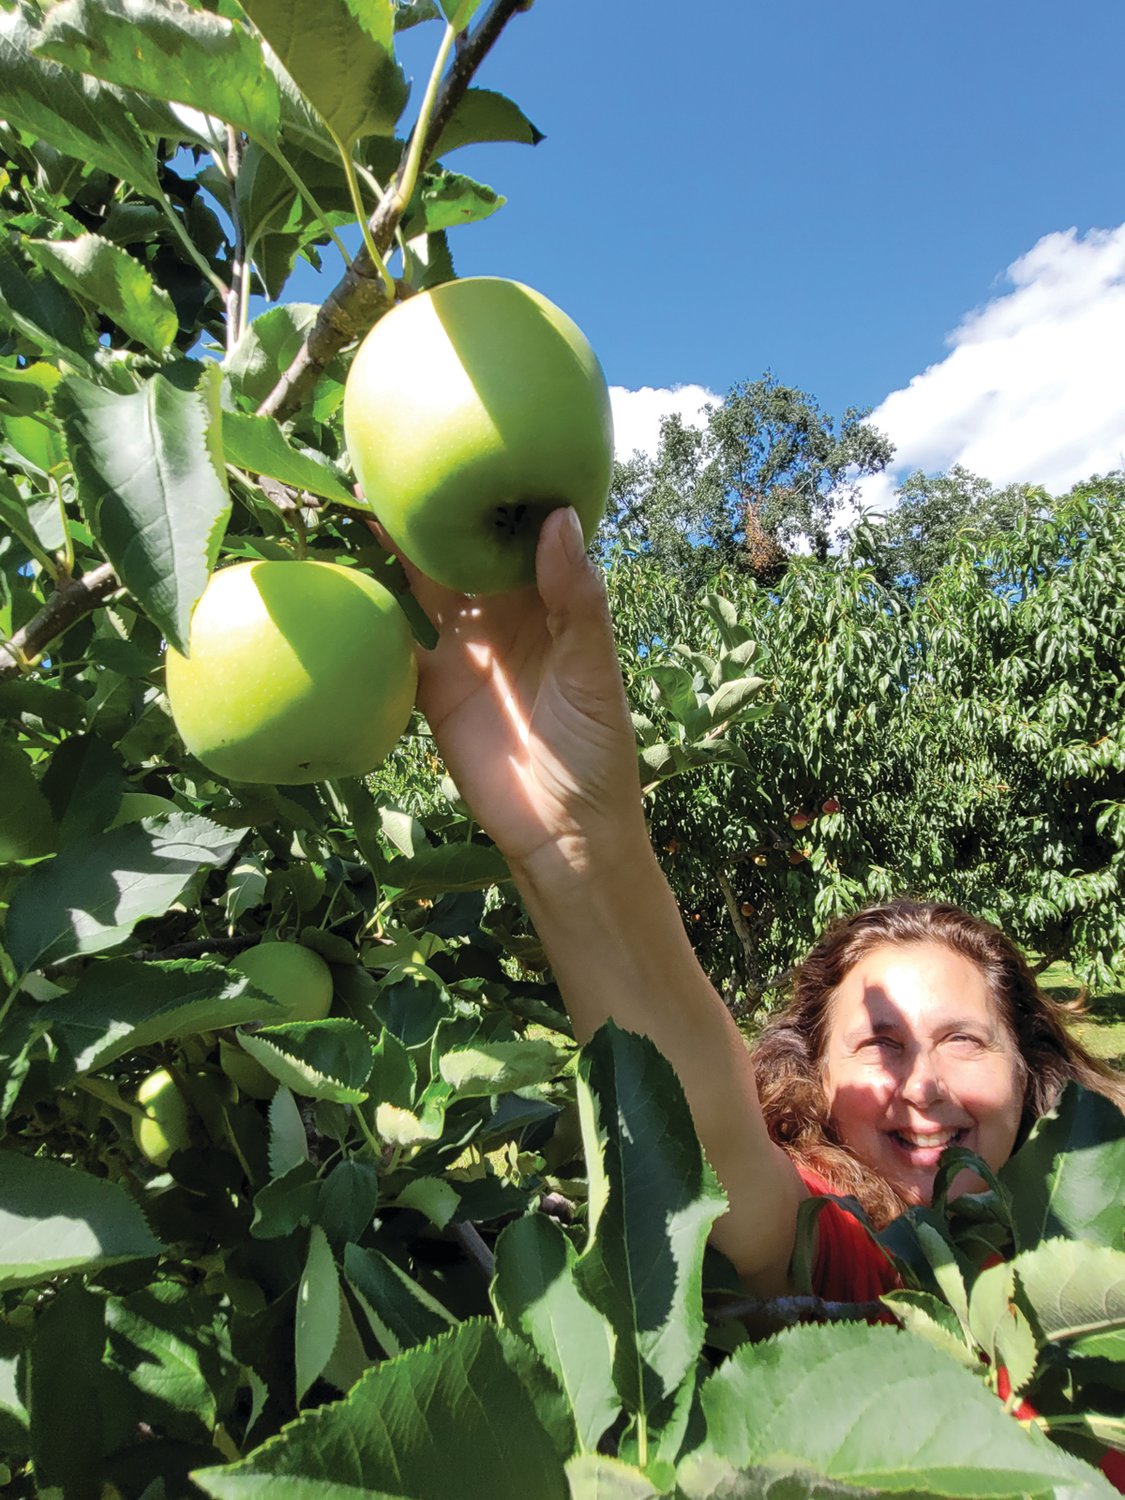 RIPE FOR PICKING: Mary Lou D’Andrea and her husband Lou own Appleland Orchards in Smithfield. She reaches up to pick a ripe apple this week, in preparation for this weekend’s Apple Festival in Johnston.